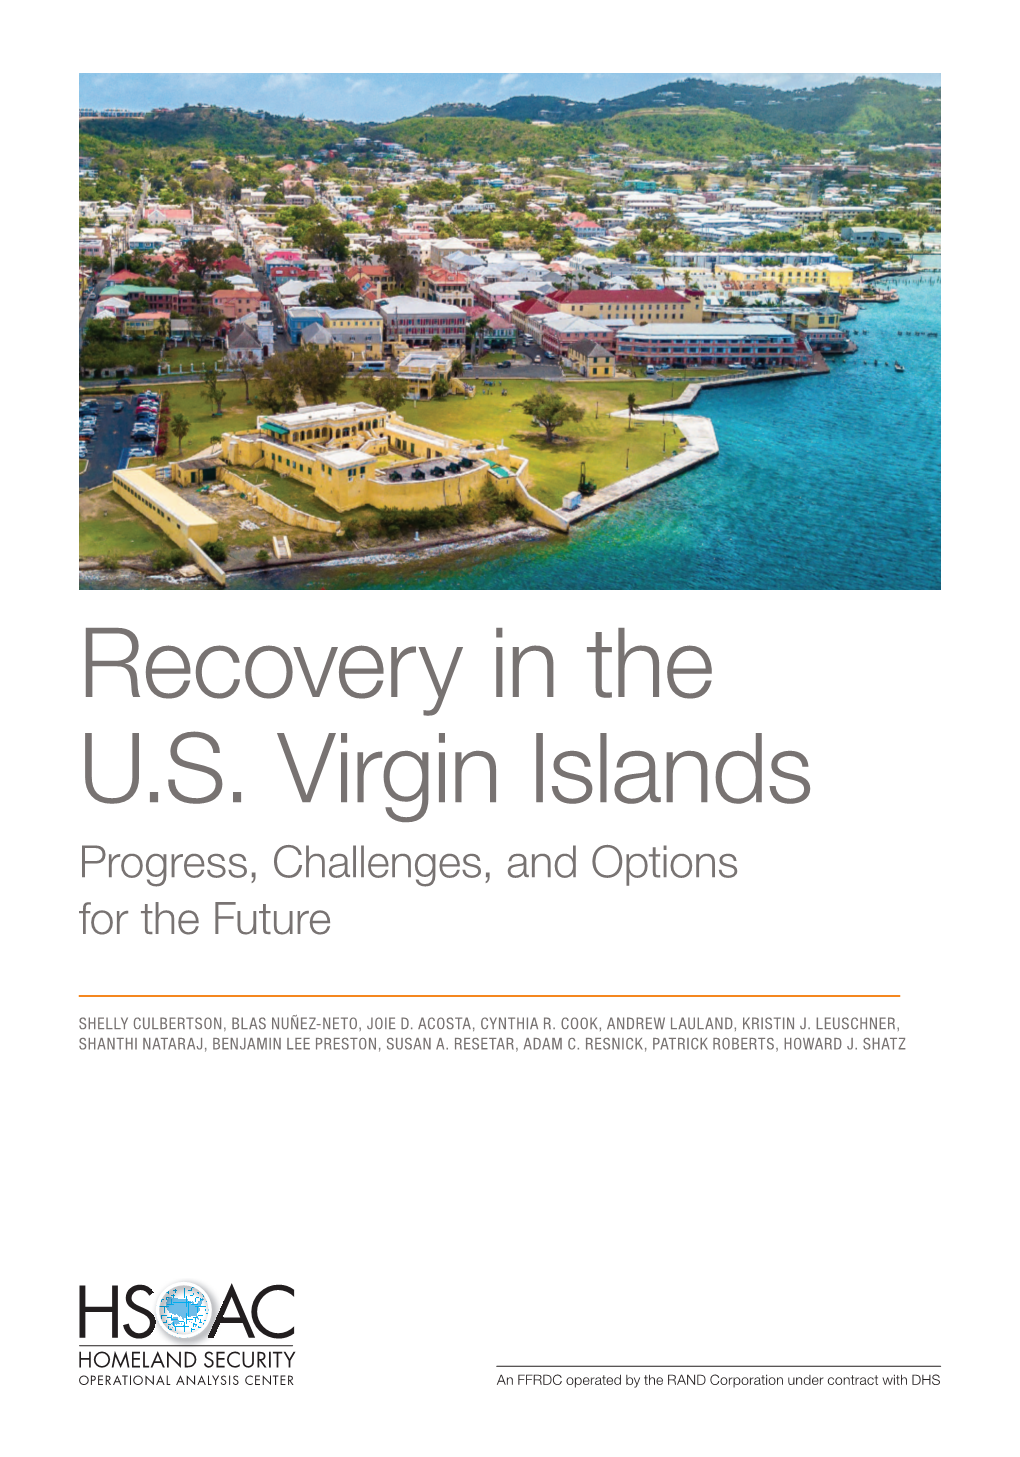 Recovery in the U.S. Virgin Islands: Progress, Challenges, and Options for the Future